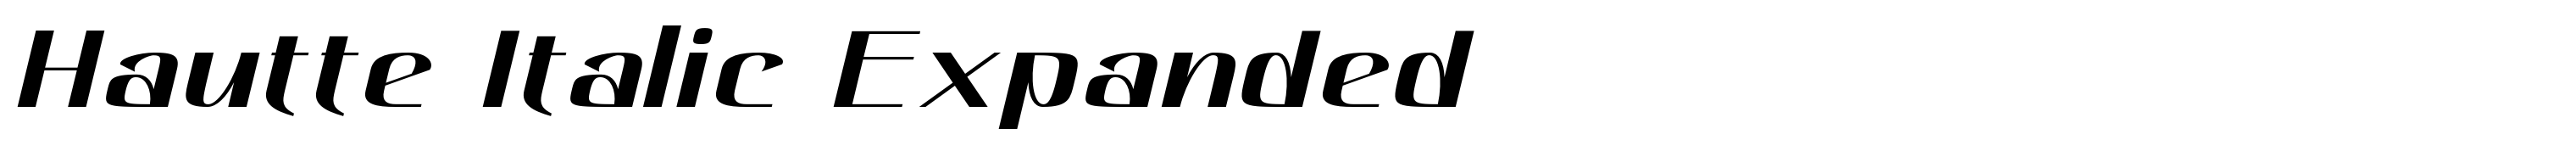 Hautte Italic Expanded